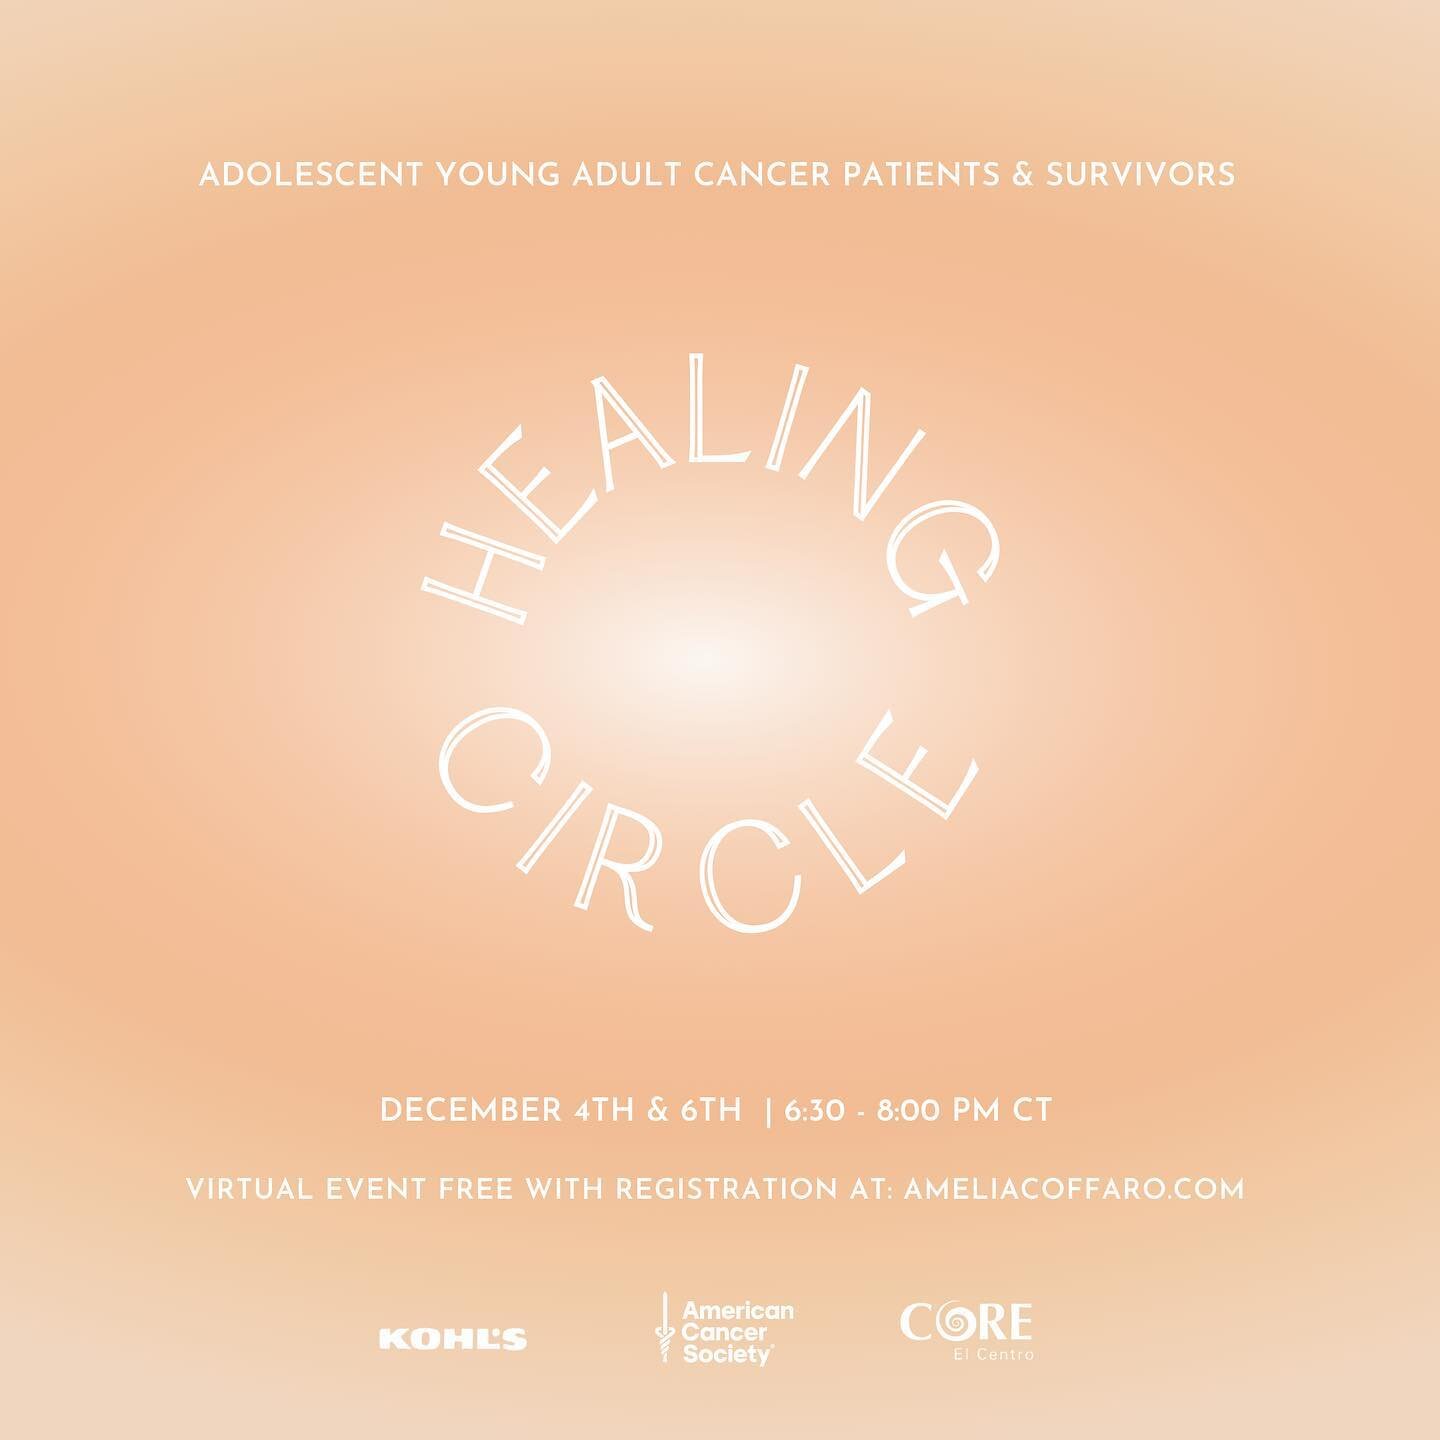 I am pleased to be partnering with @core_elcentro to lead a virtual Healing Circle for adolescent young adult cancer patients and survivors on December 4th and 6th!

This offering will co-create supportive community for participants to share openly a